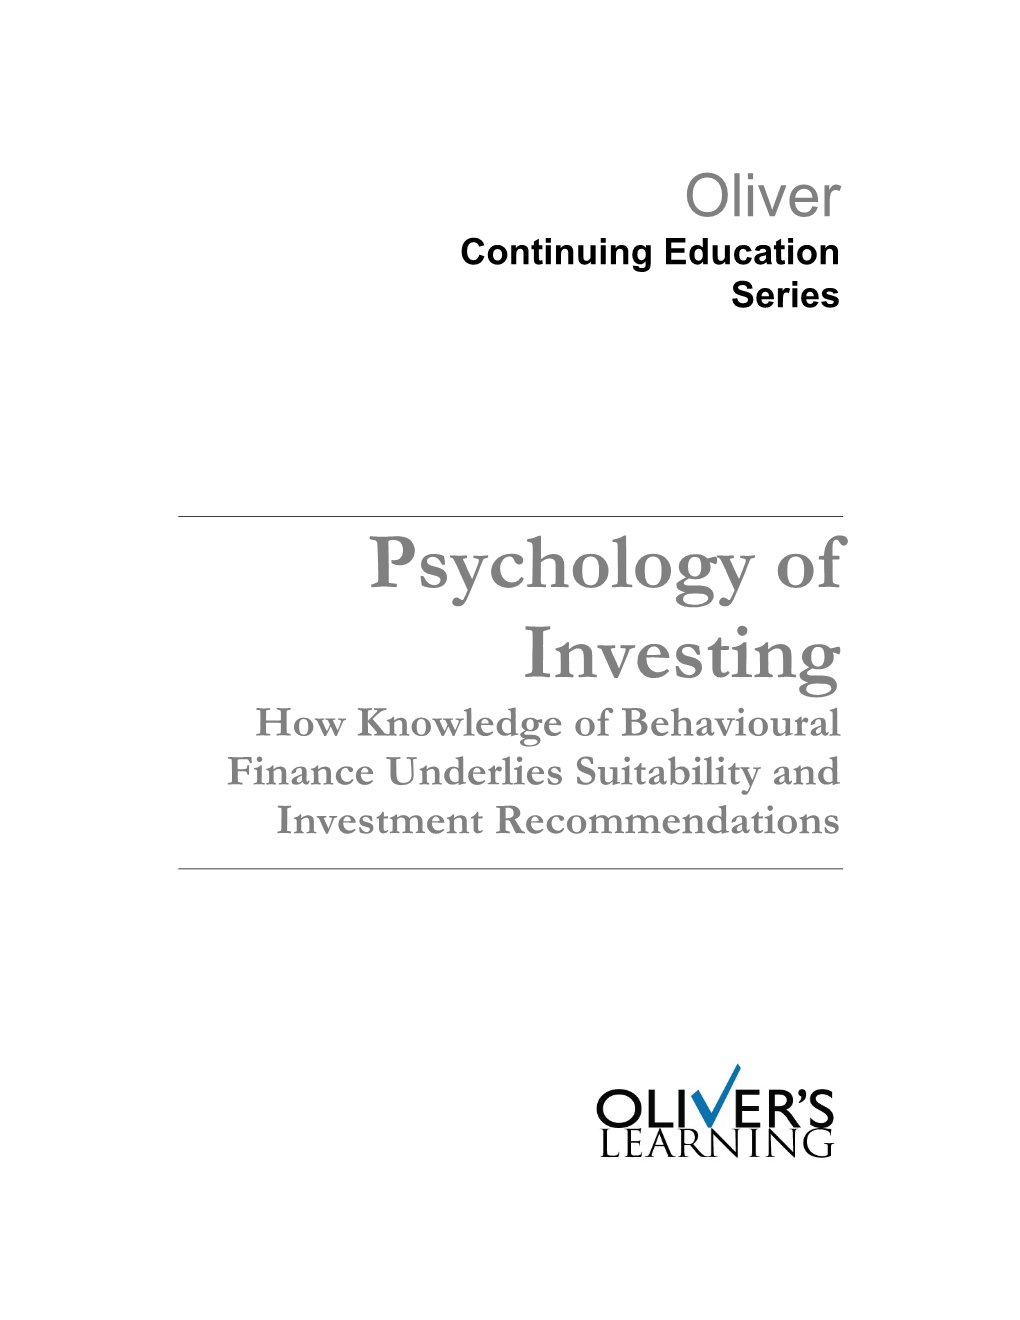 Psychology of Investing How Knowledge of Behavioural Finance Underlies Suitability and Investment Recommendations